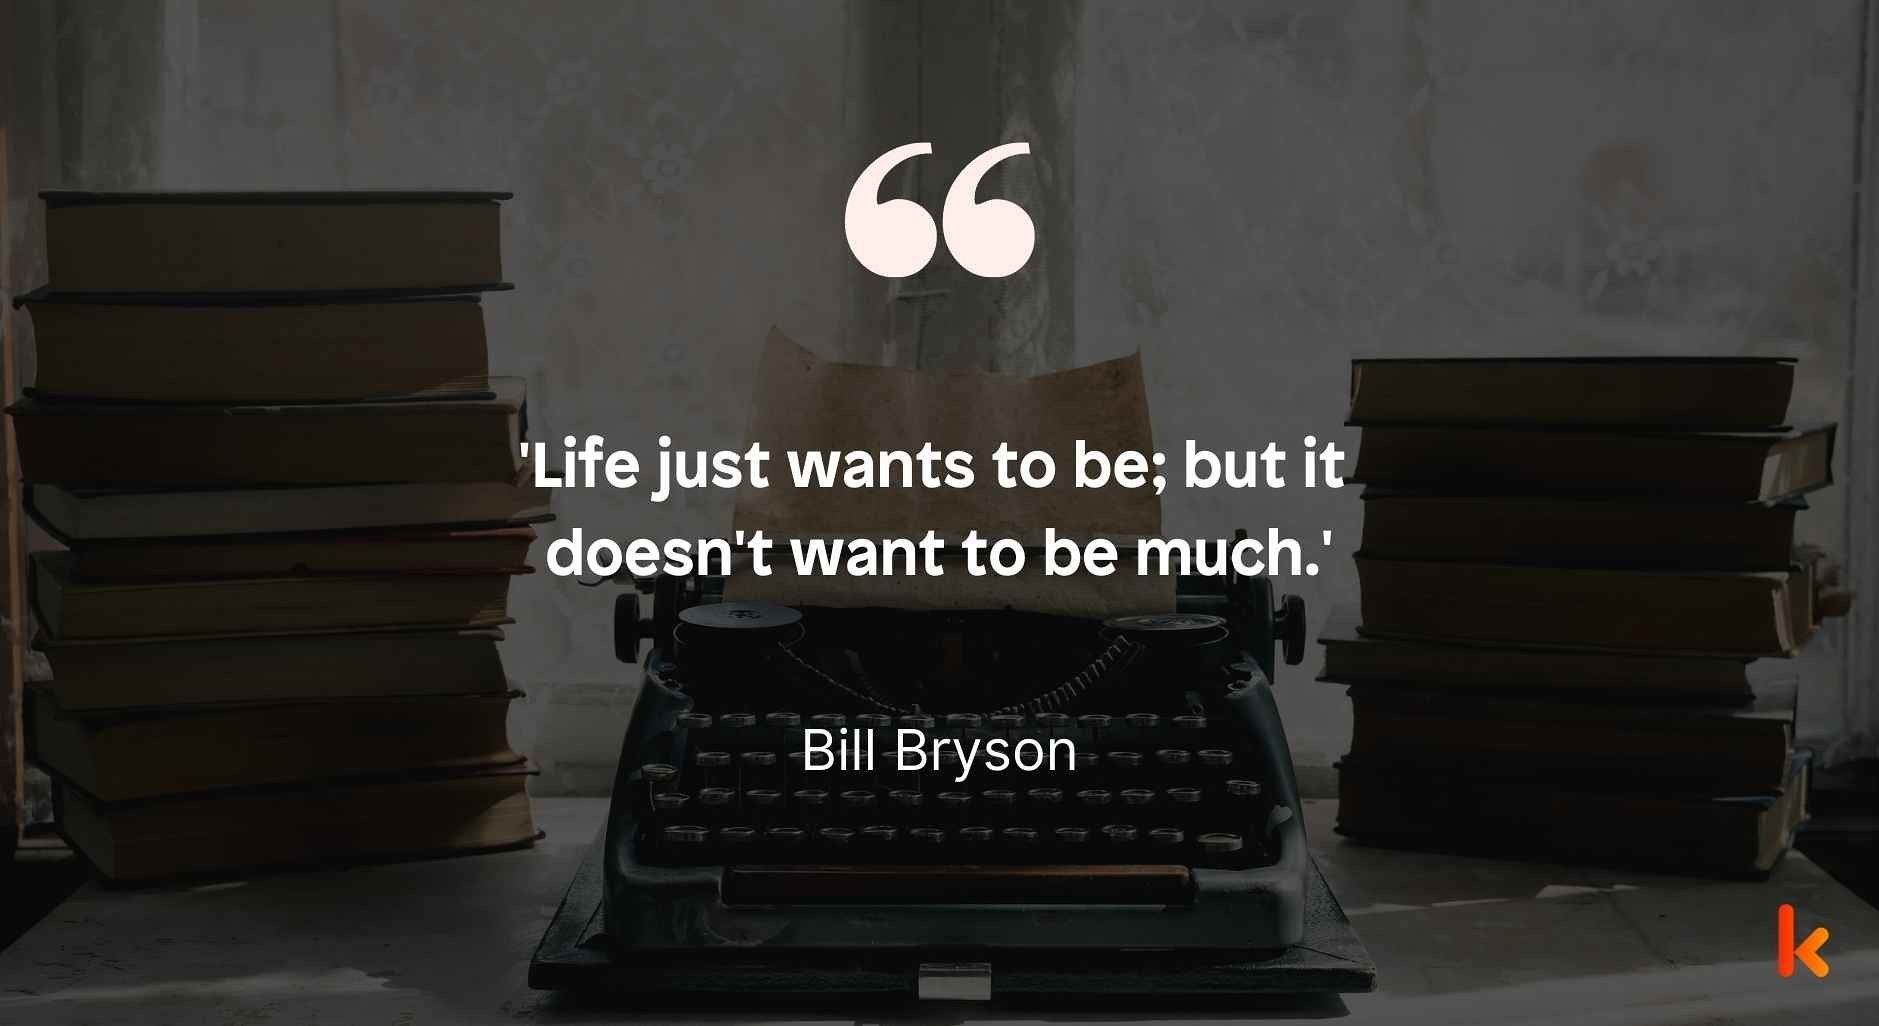 Quote by Bill Bryson